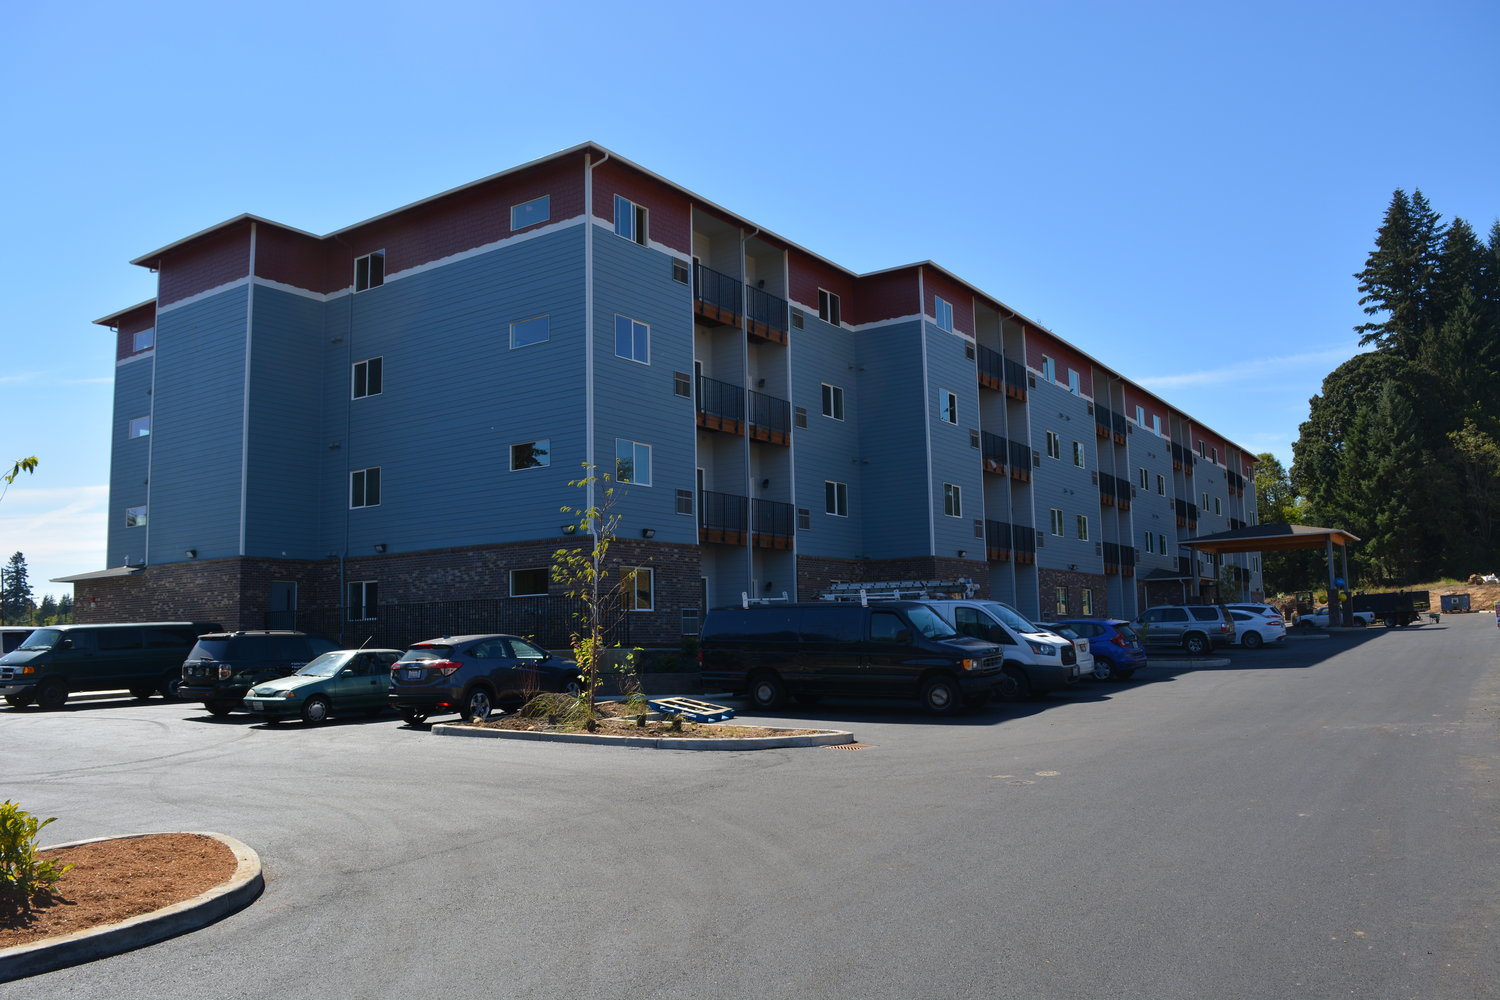 The Trails at Salmon Creek is a new four-story apartment community for those ages 62 and up. The building has 94 units with indoor hallways along with a community room, craft room and fitness center.